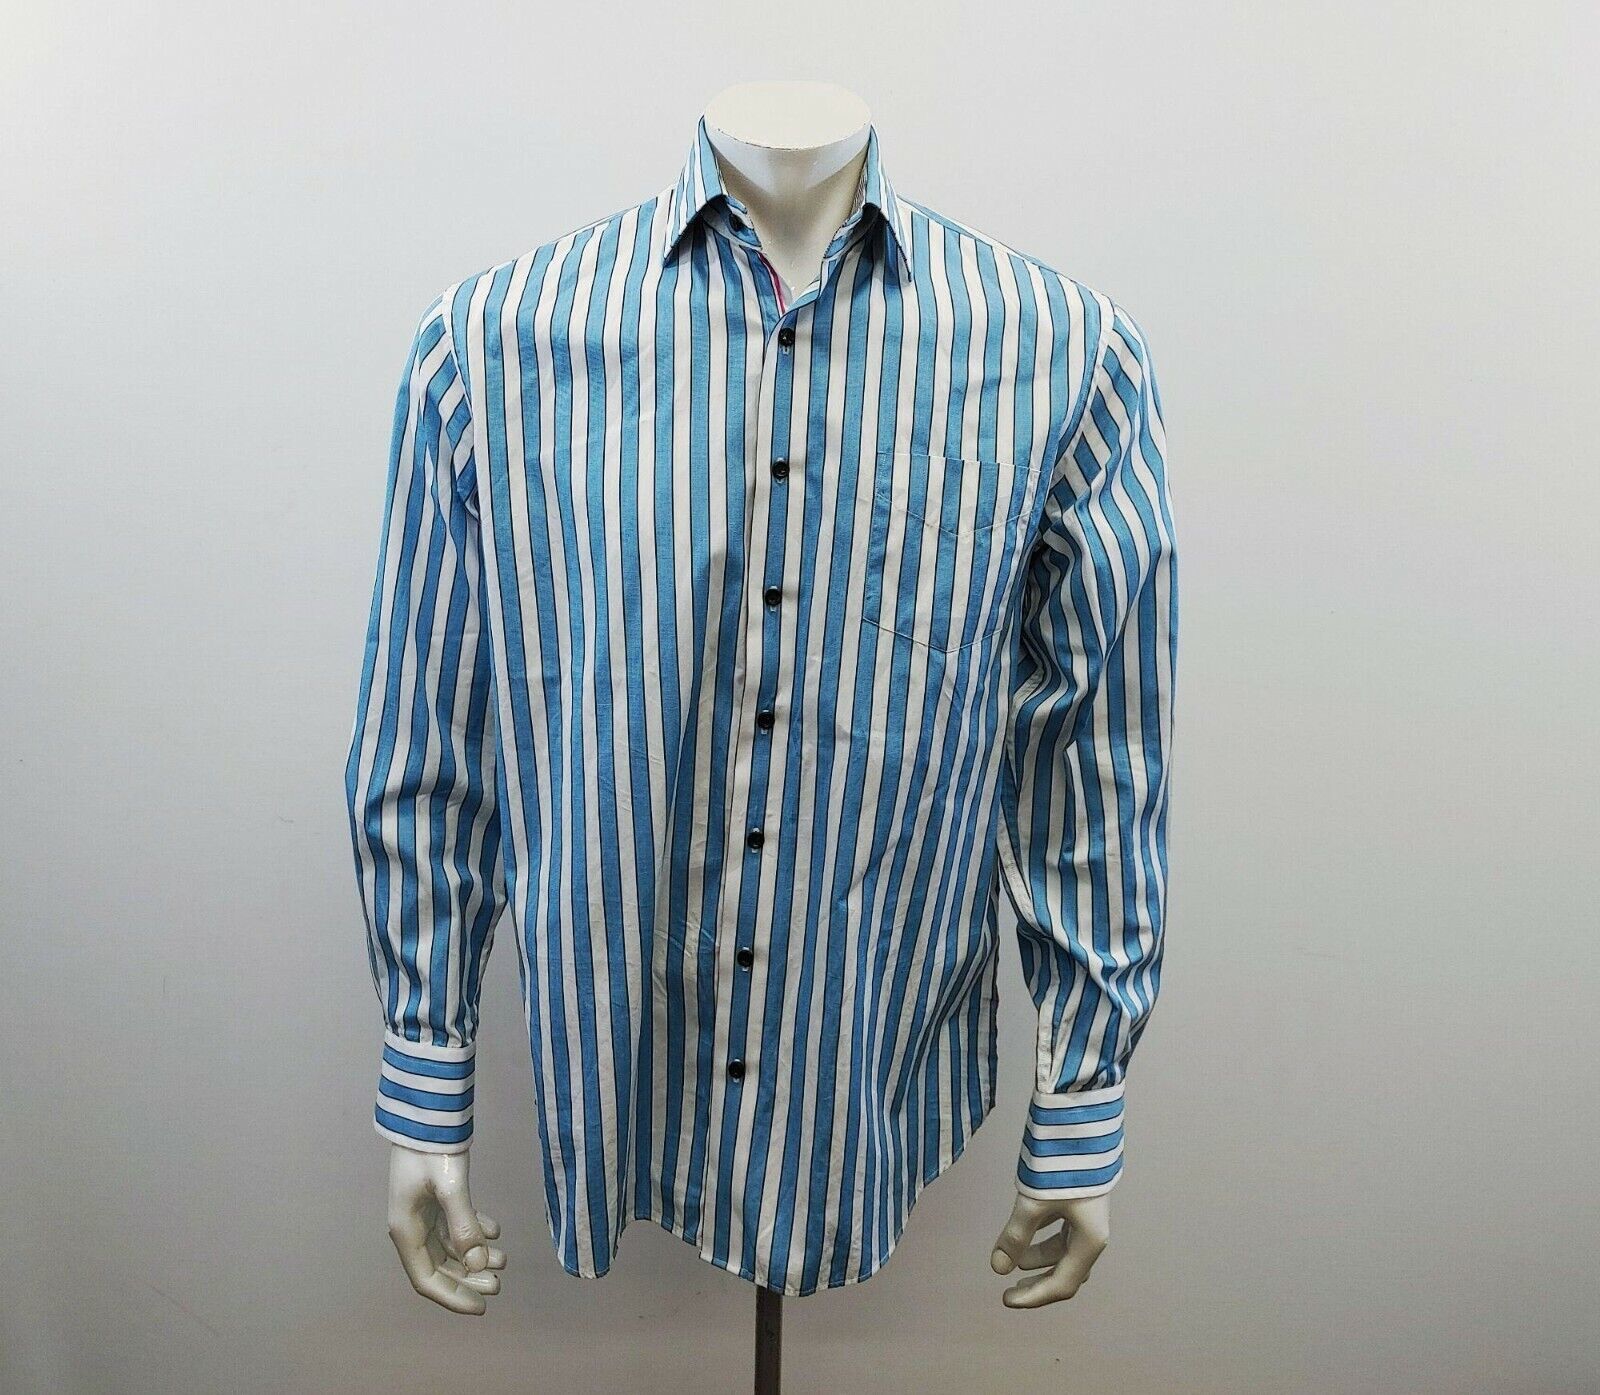 Primary image for ARNOLD ZIMBERG HOLLYWOOD Men's Coordinating Cuffs Button Up Shirt Size 15.5 Whit